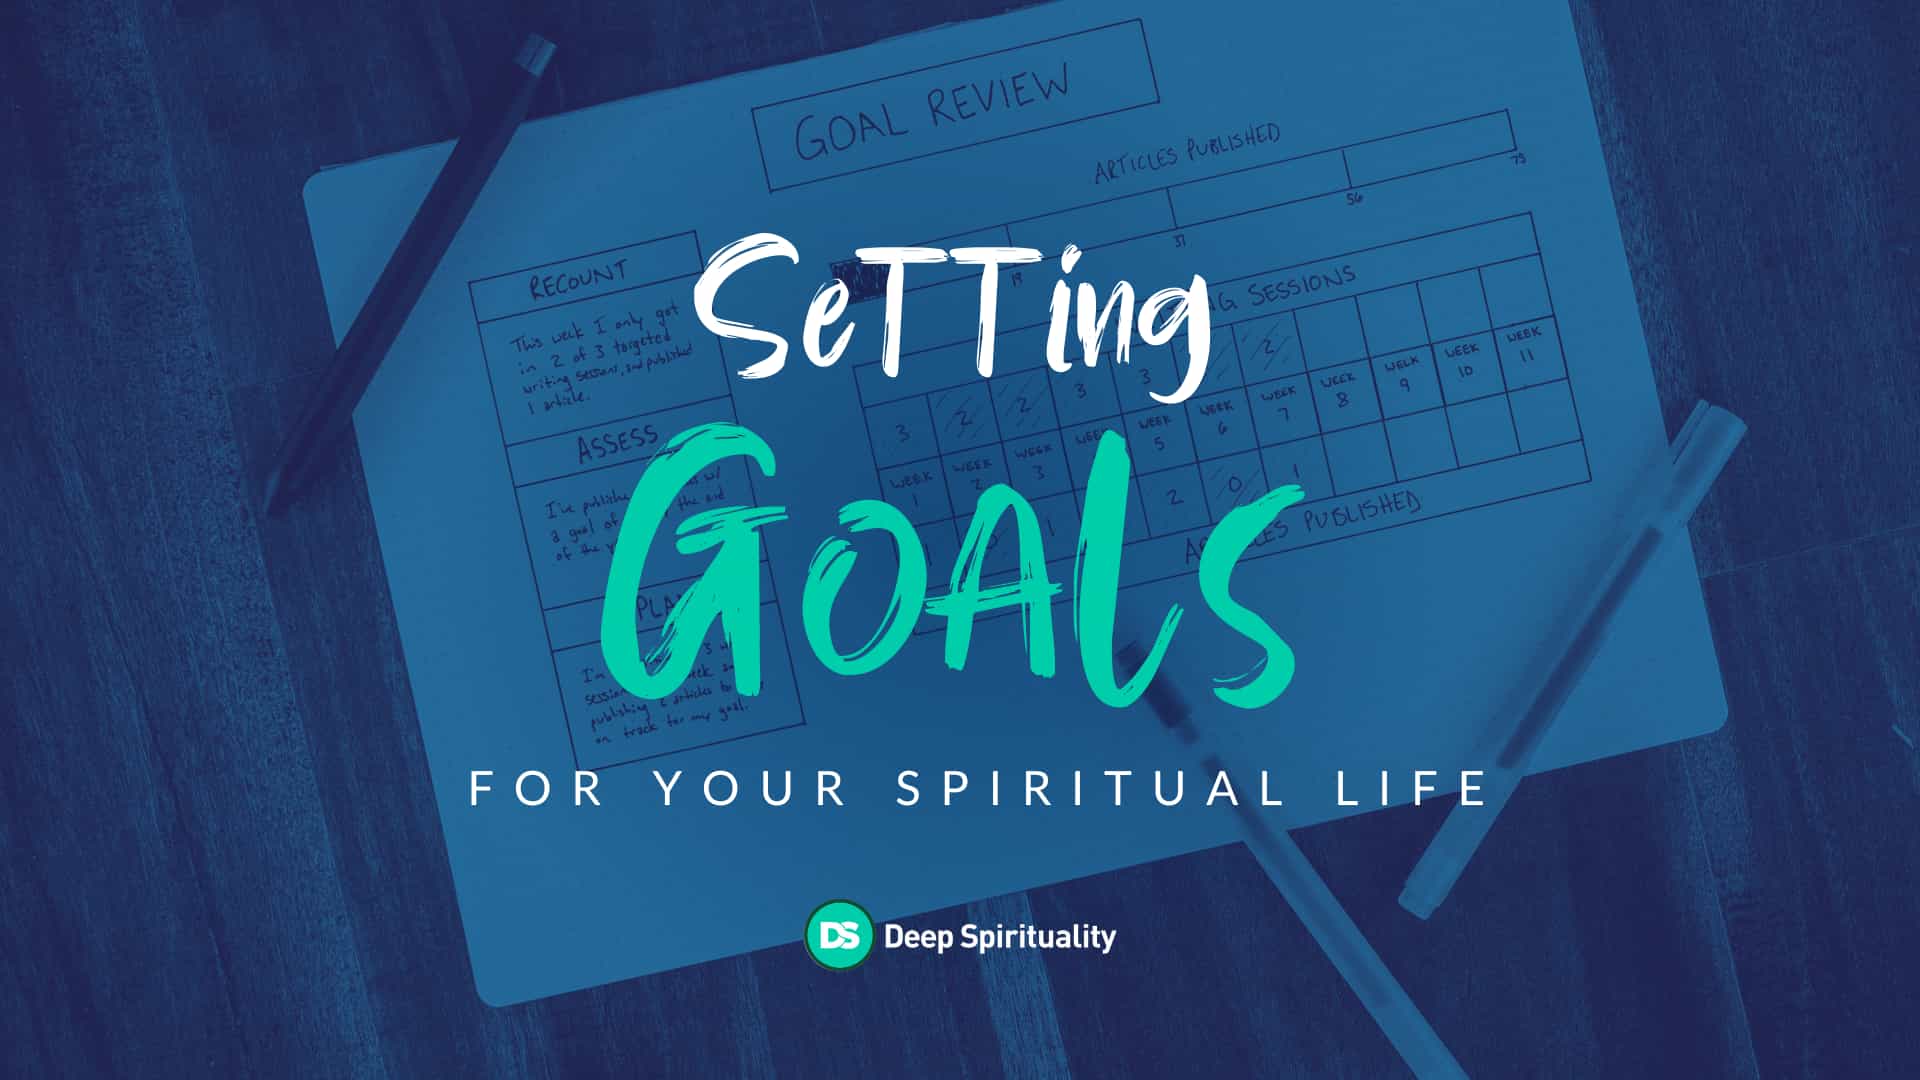 How to Set Goals for Your Spiritual Life 7